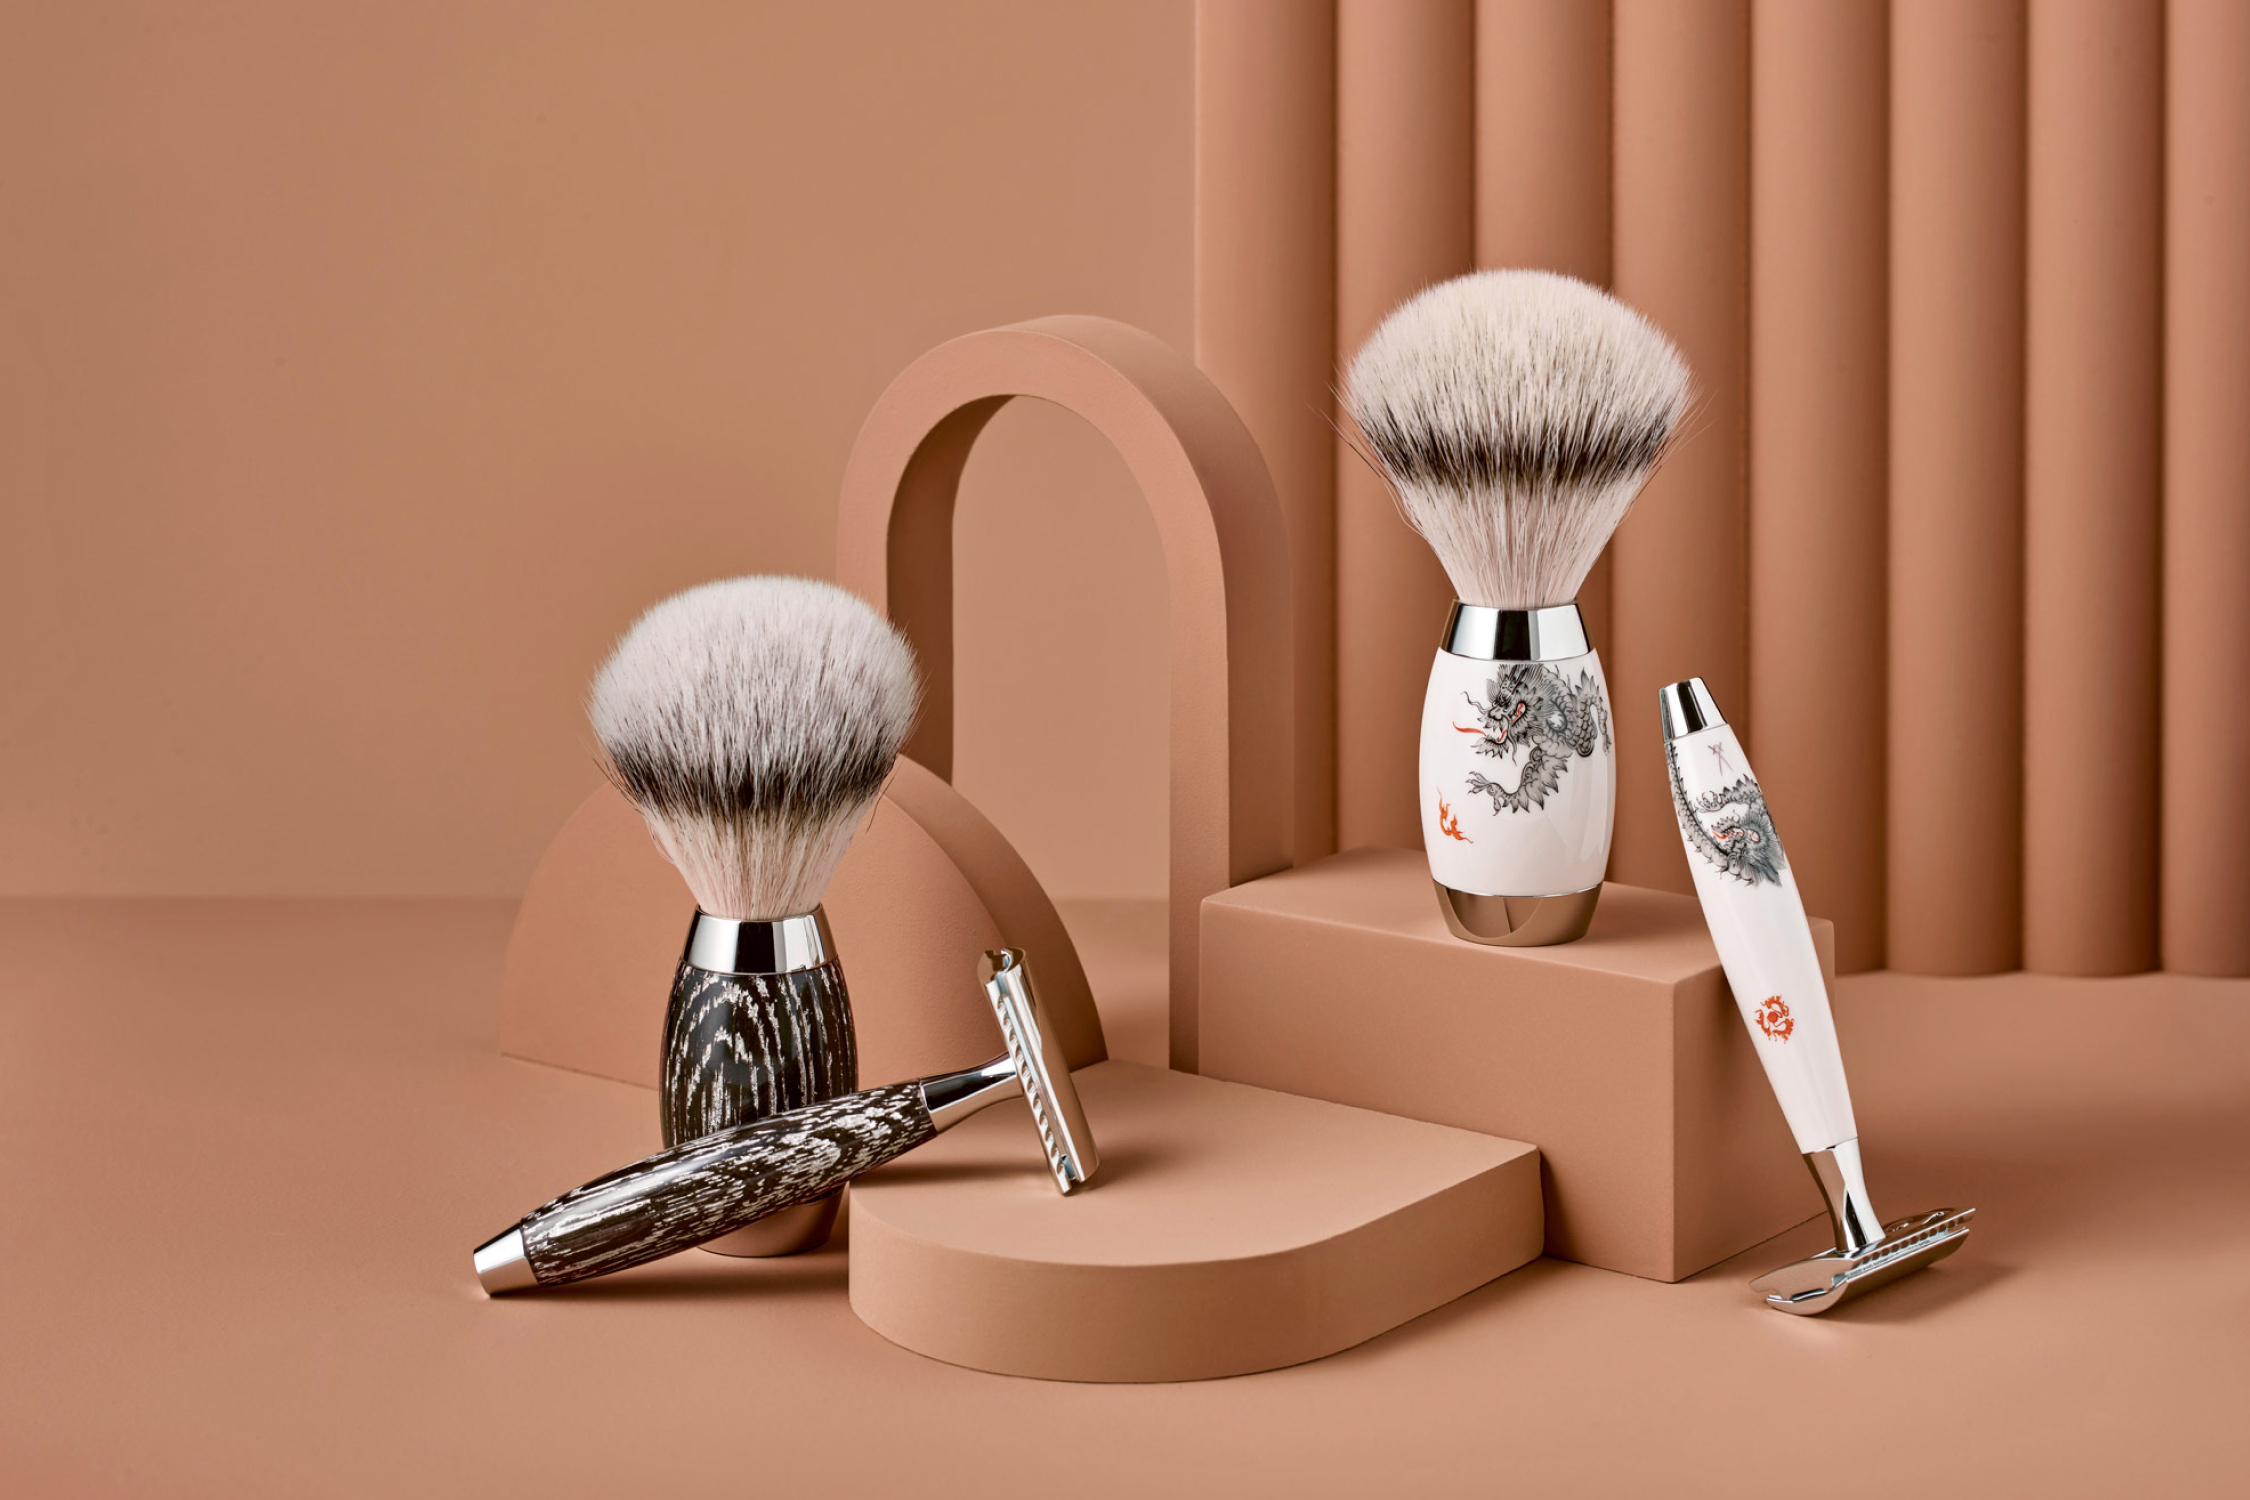 The Architecture of Shaving